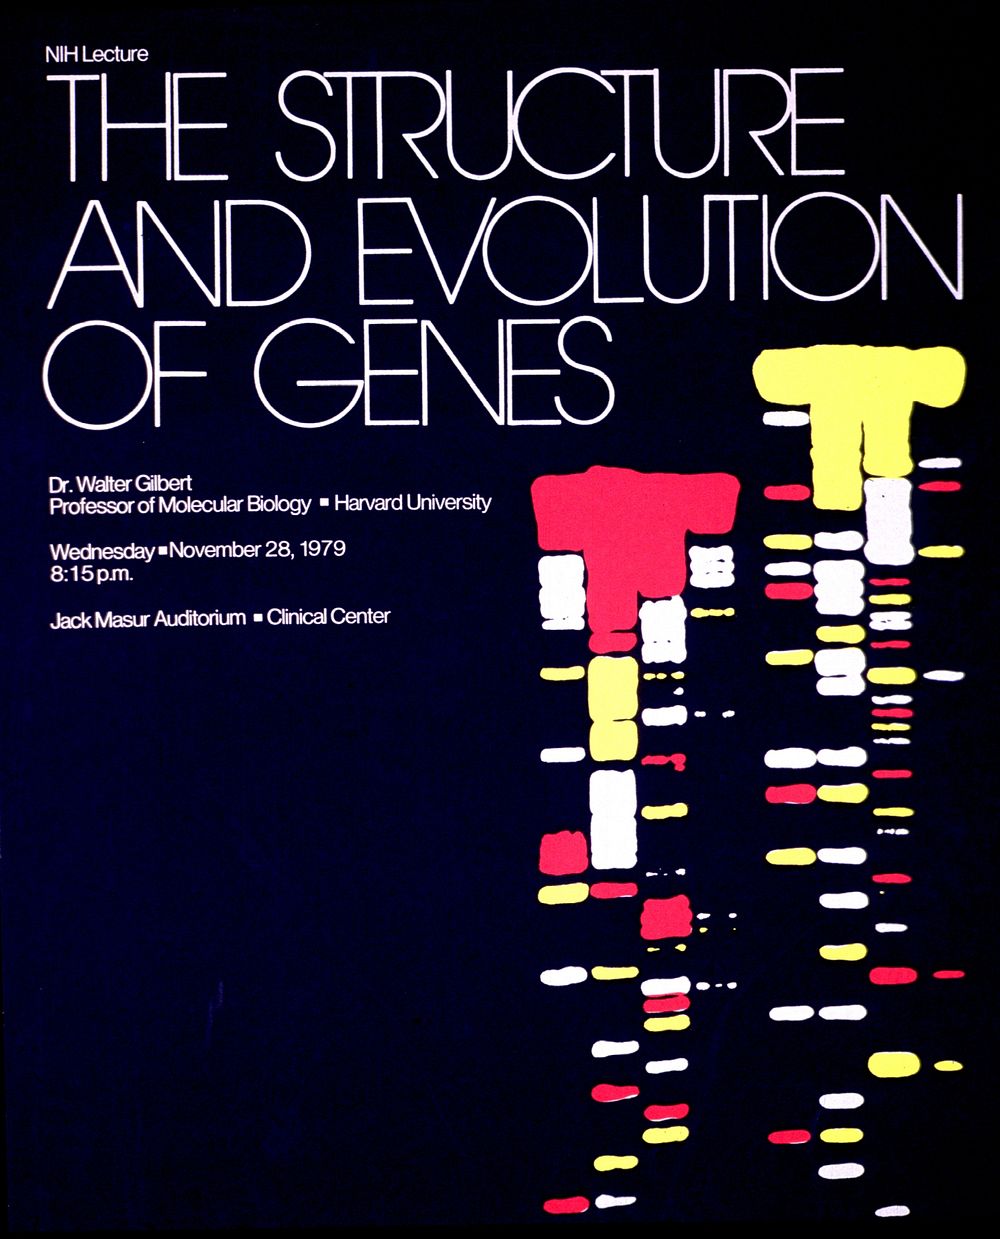 Structure and Evolution of Genes. Original public domain image from Flickr